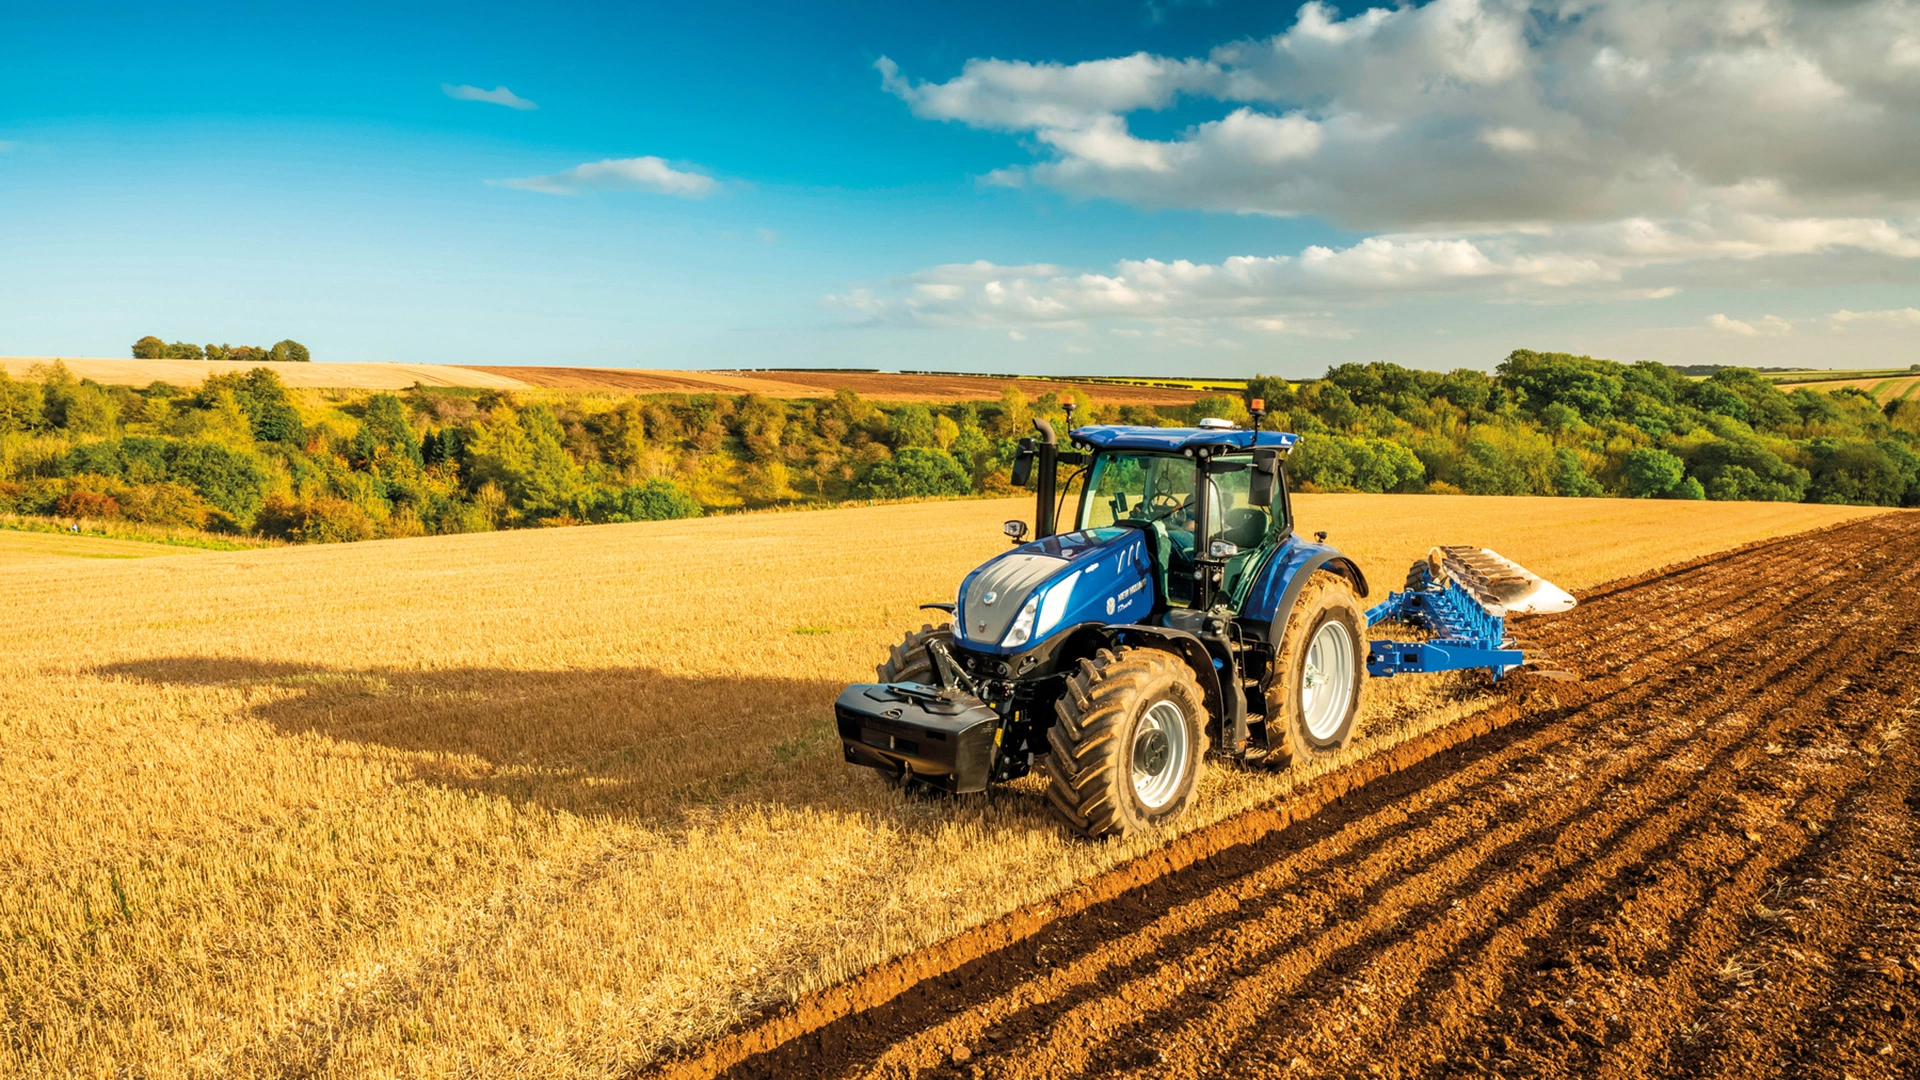 New Holland tractor with a reversible plough tilling golden farmland